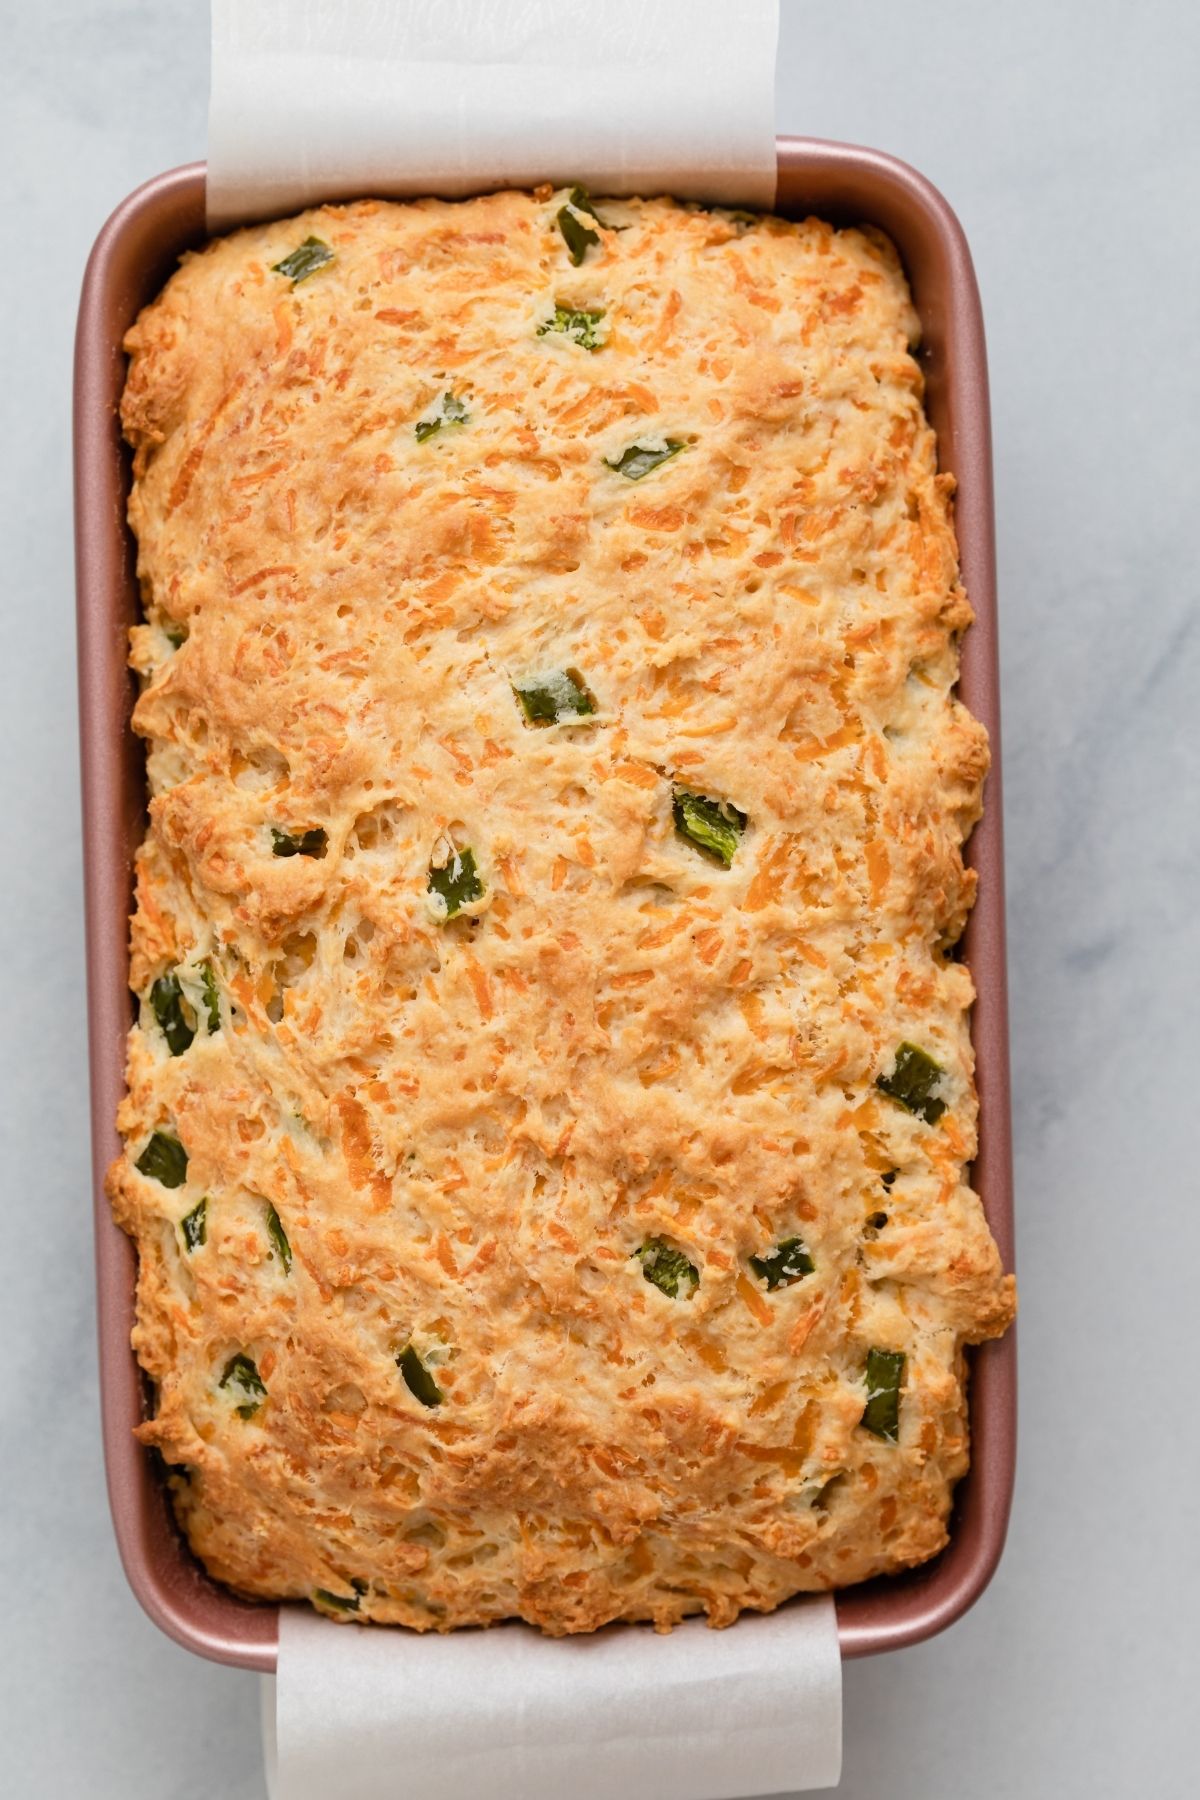 baked cheddar jalapeno buttermilk bread in a loaf pan